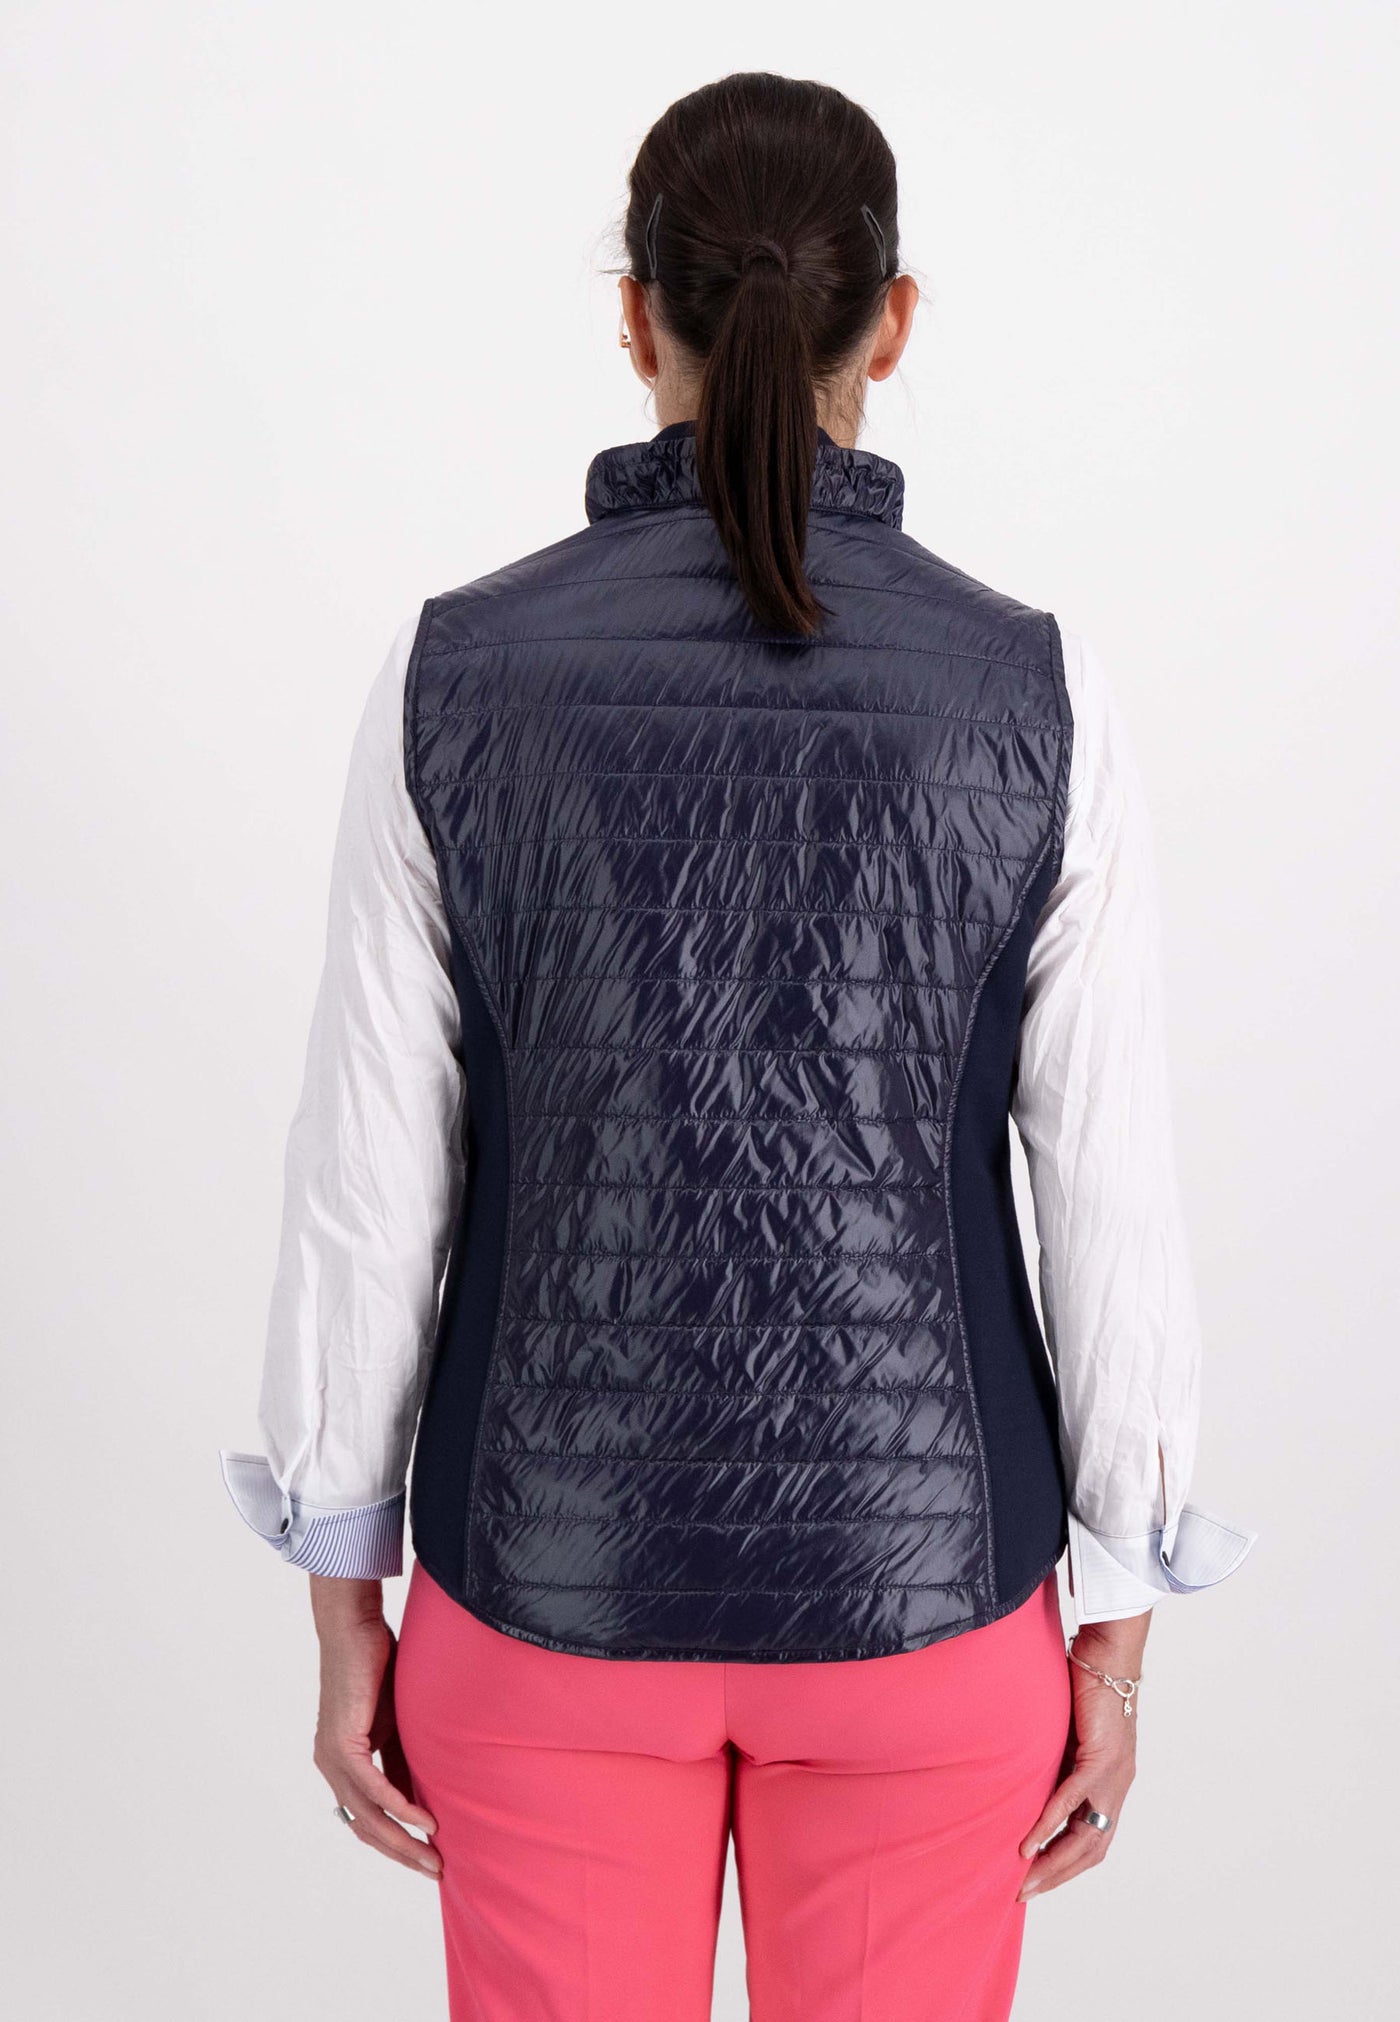 Navy Padded Gilet with Side Panels & Diamonte Detail